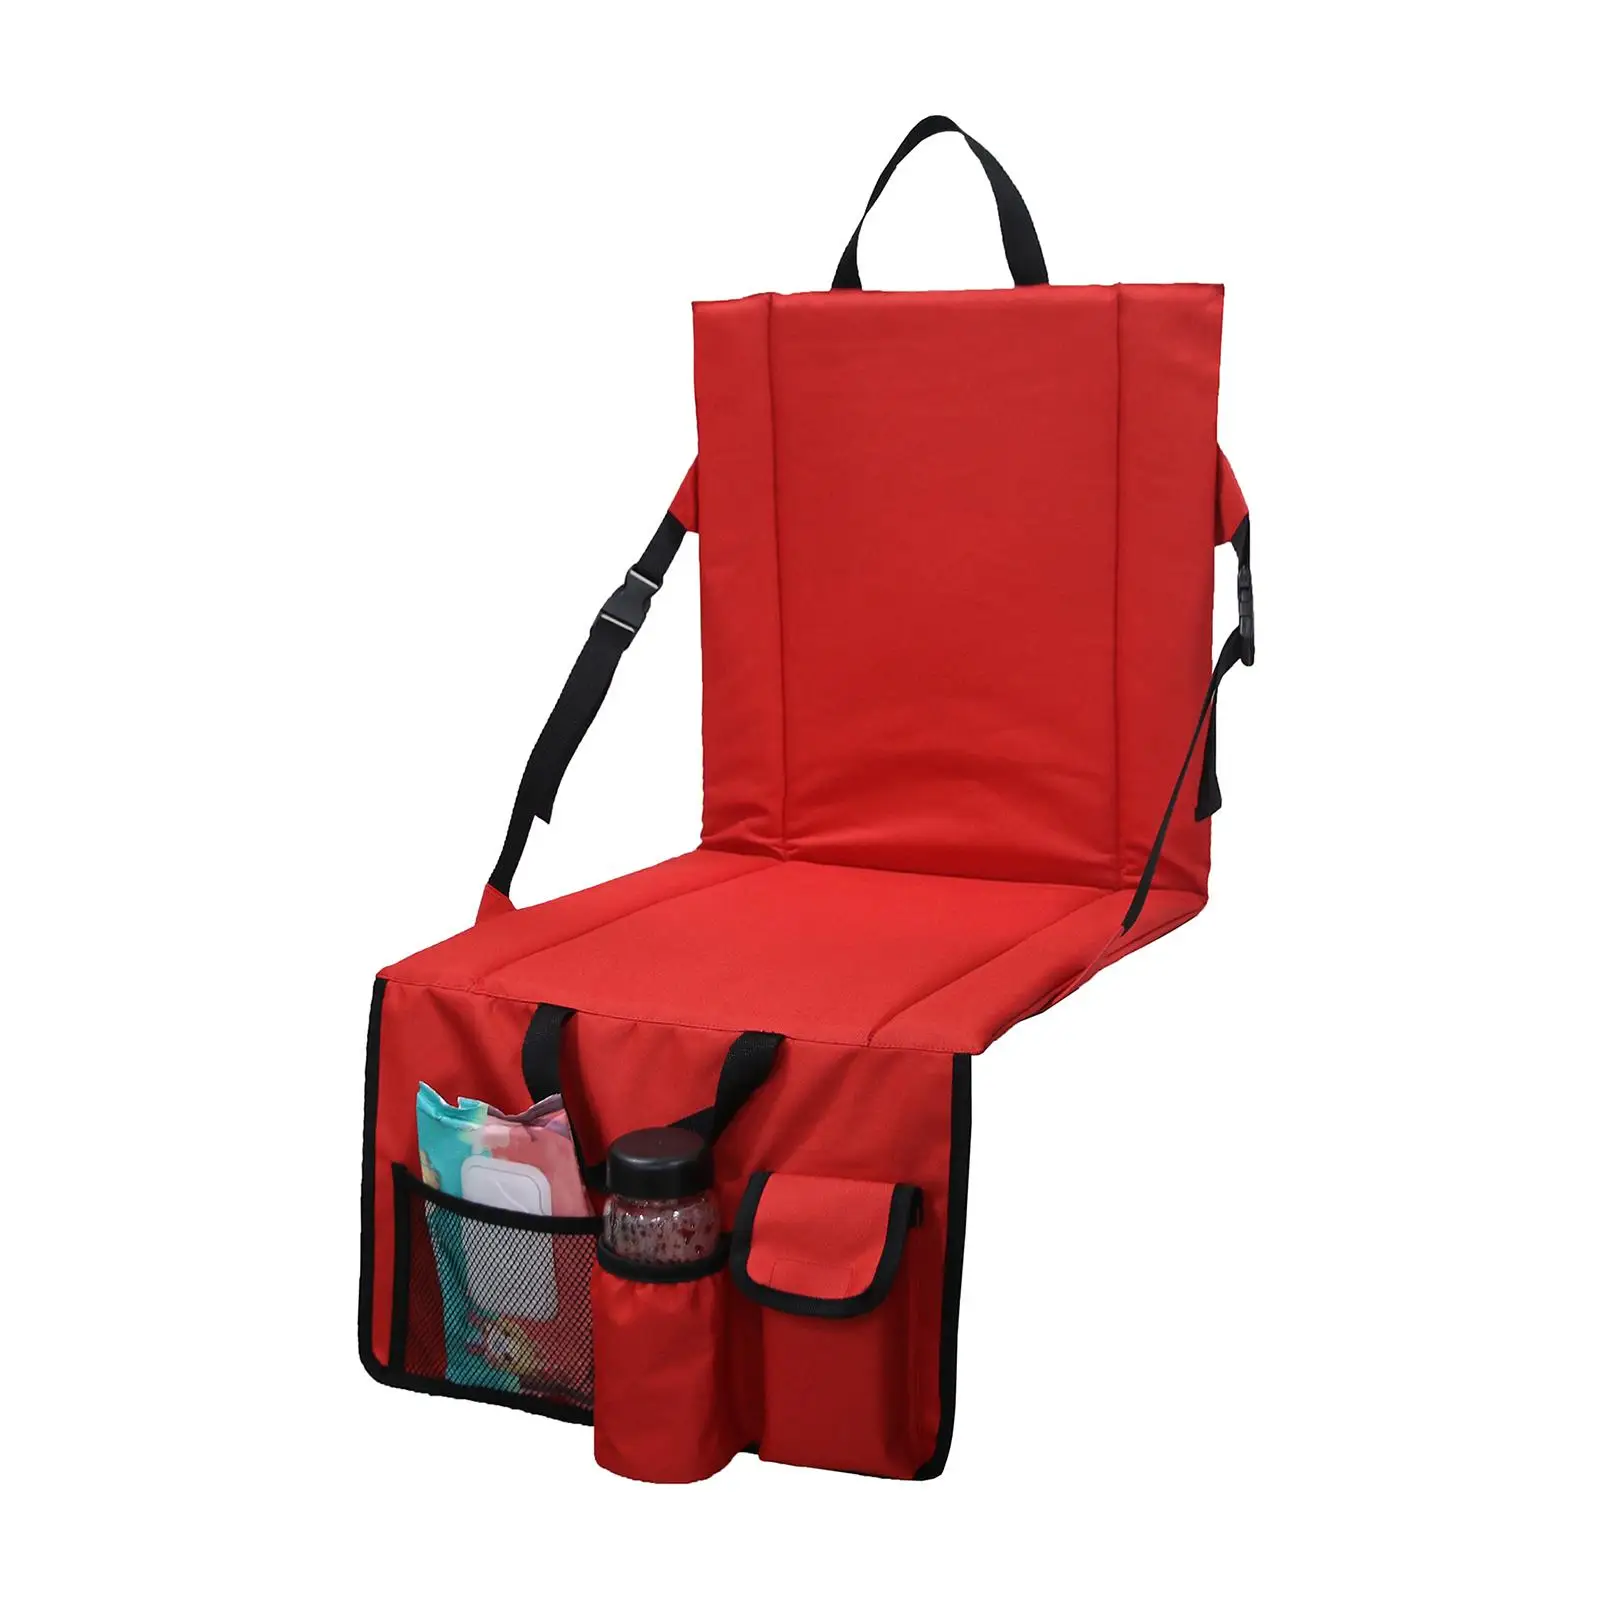 Folding Stadium Chair with Pocket Padded Cushion Lightweight Mat Wide for Camping Beach Picnic Outdoor Barbecue